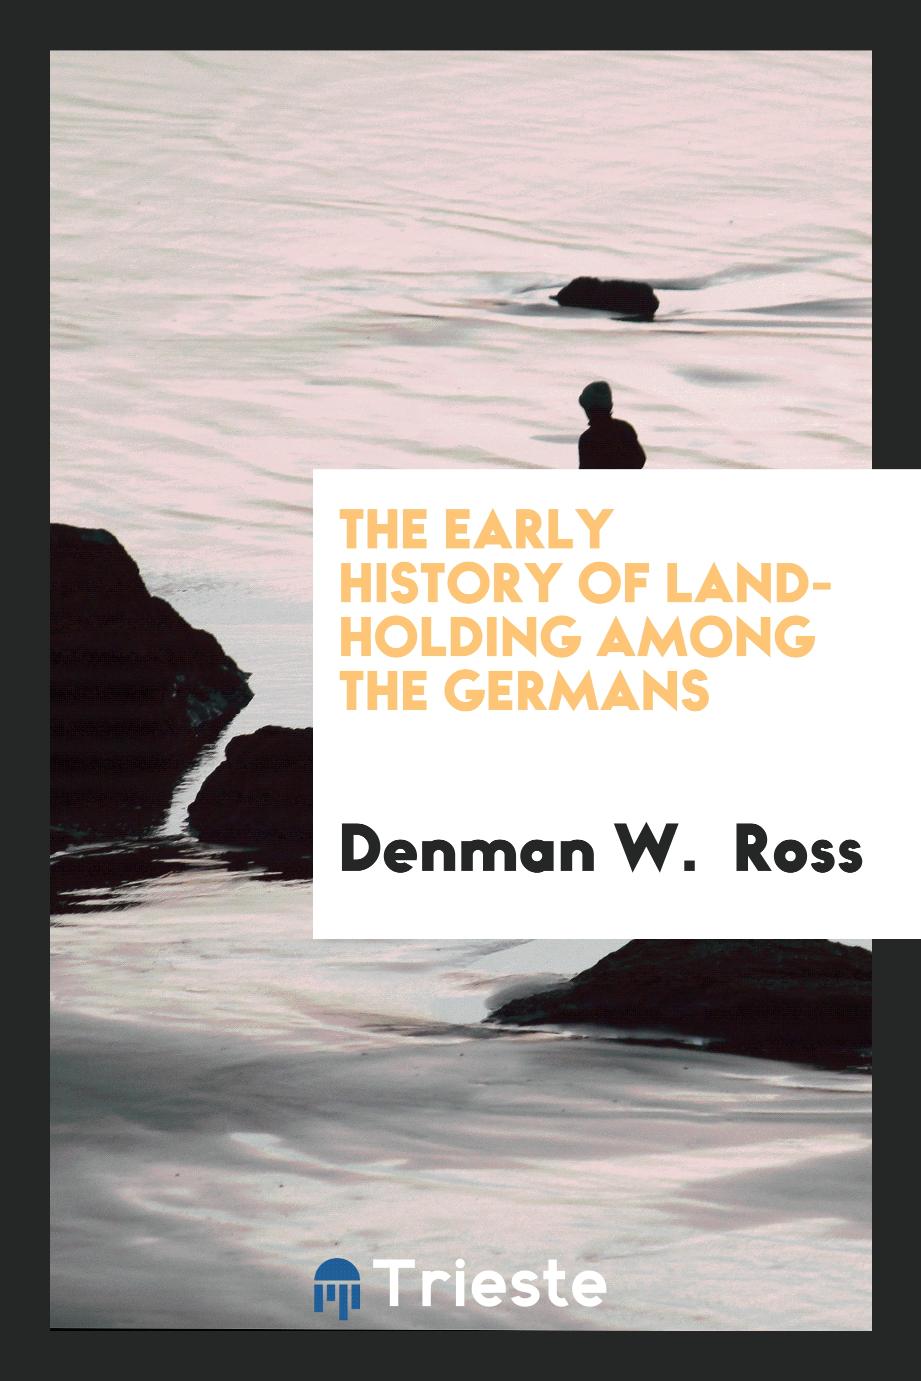 The Early History of Land-Holding among the Germans